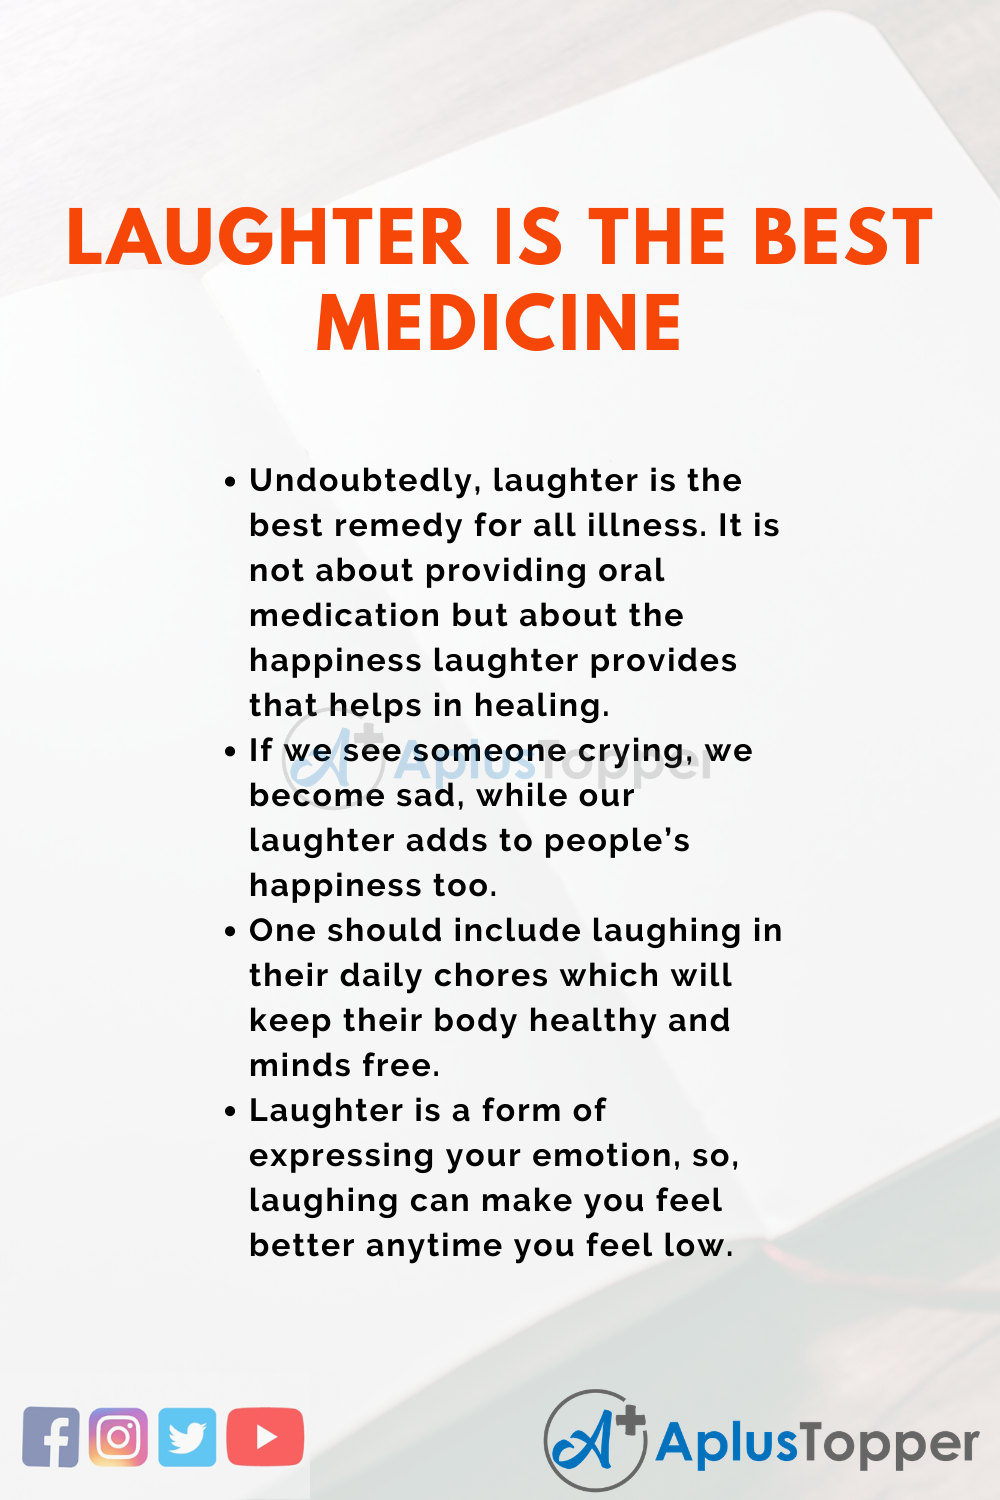 Essay on Laughter is the Best Medicine